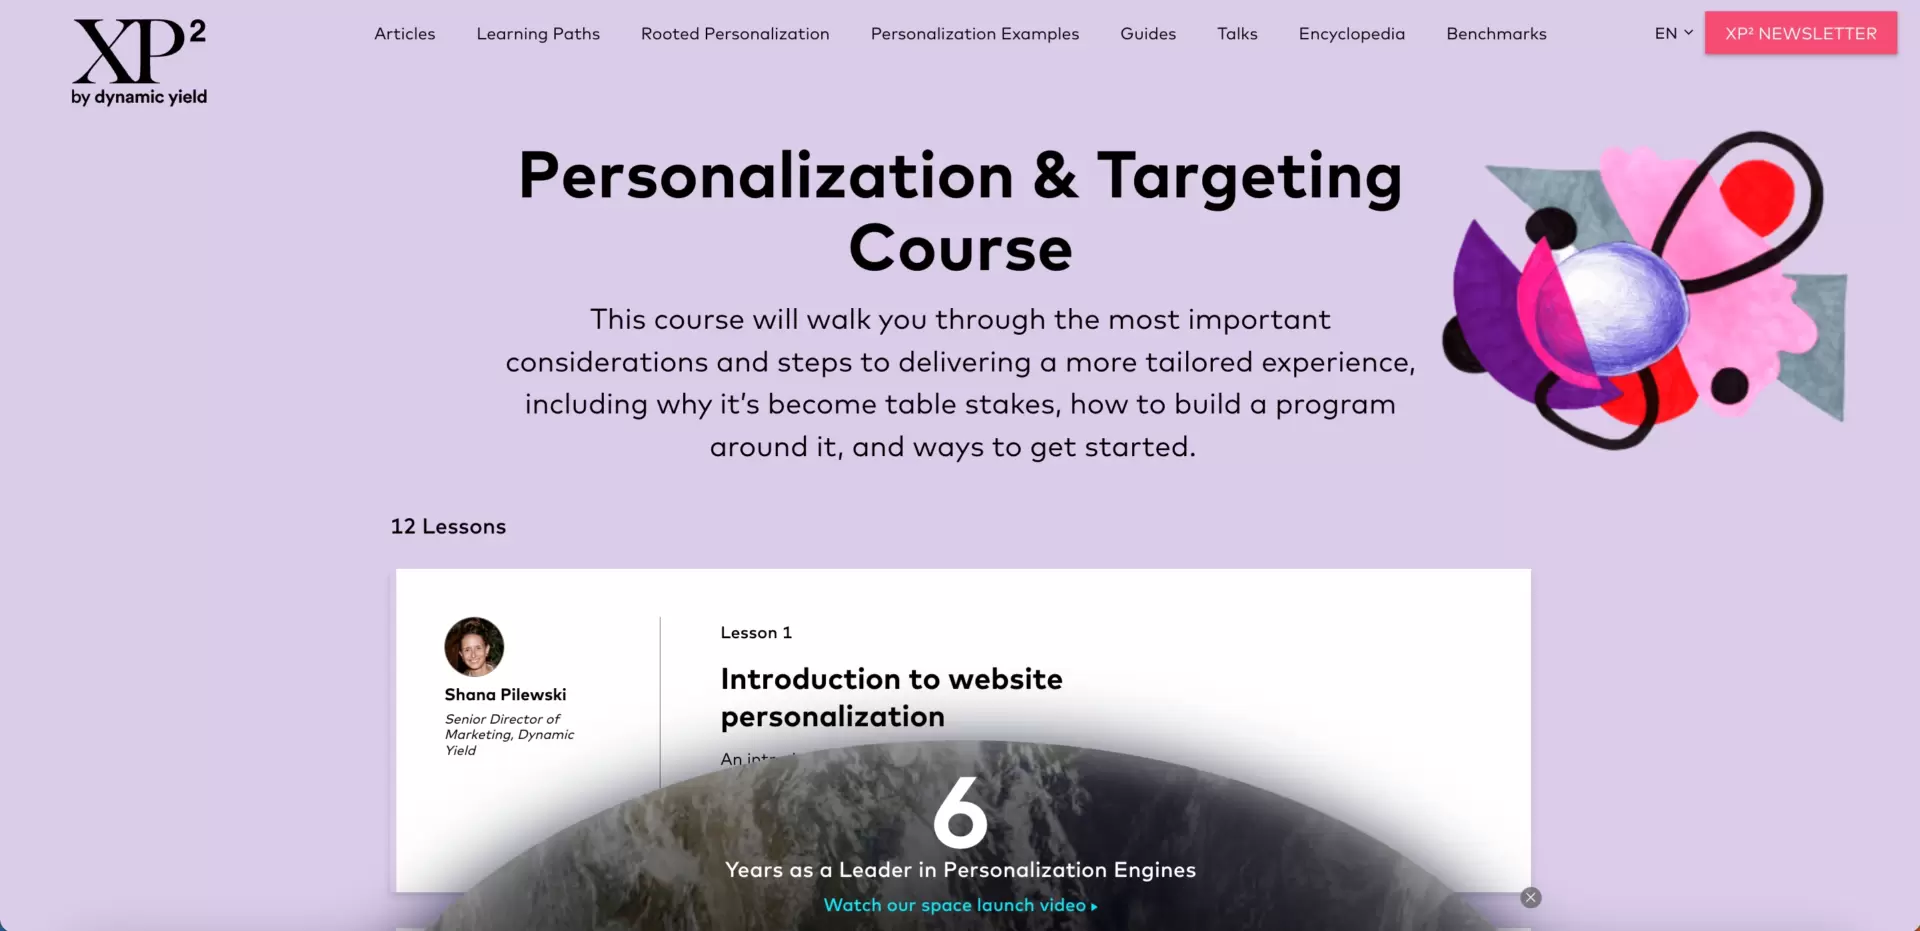 conversion optimization via personalization and targeting course 